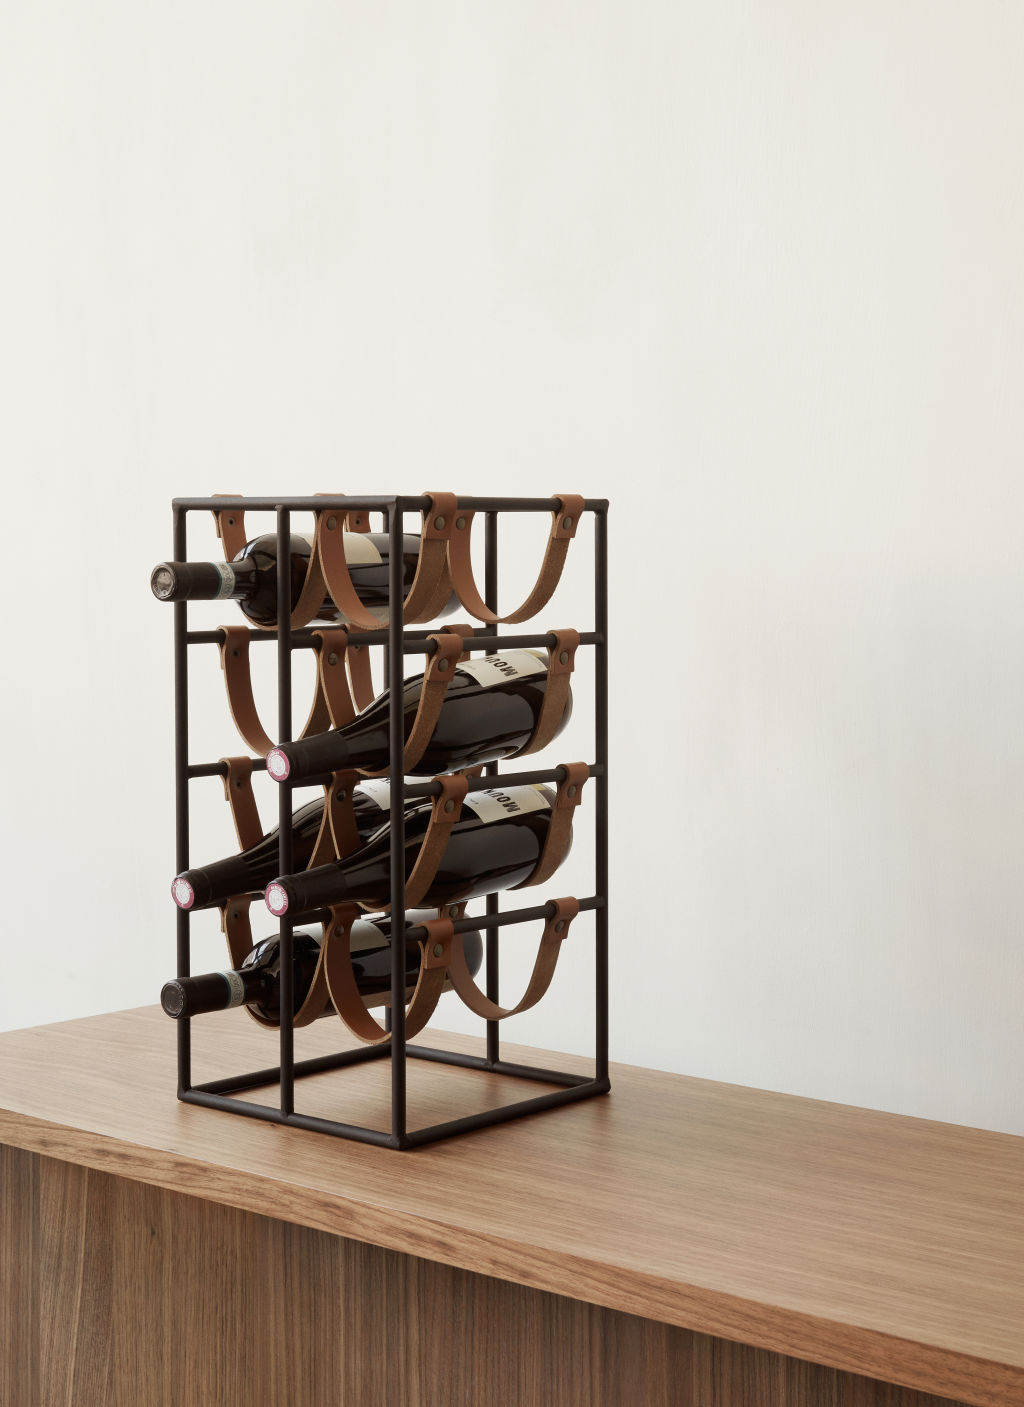 The Umanoff wine rack by Menu merges functionality with an elegant flair. Photo: Supplied